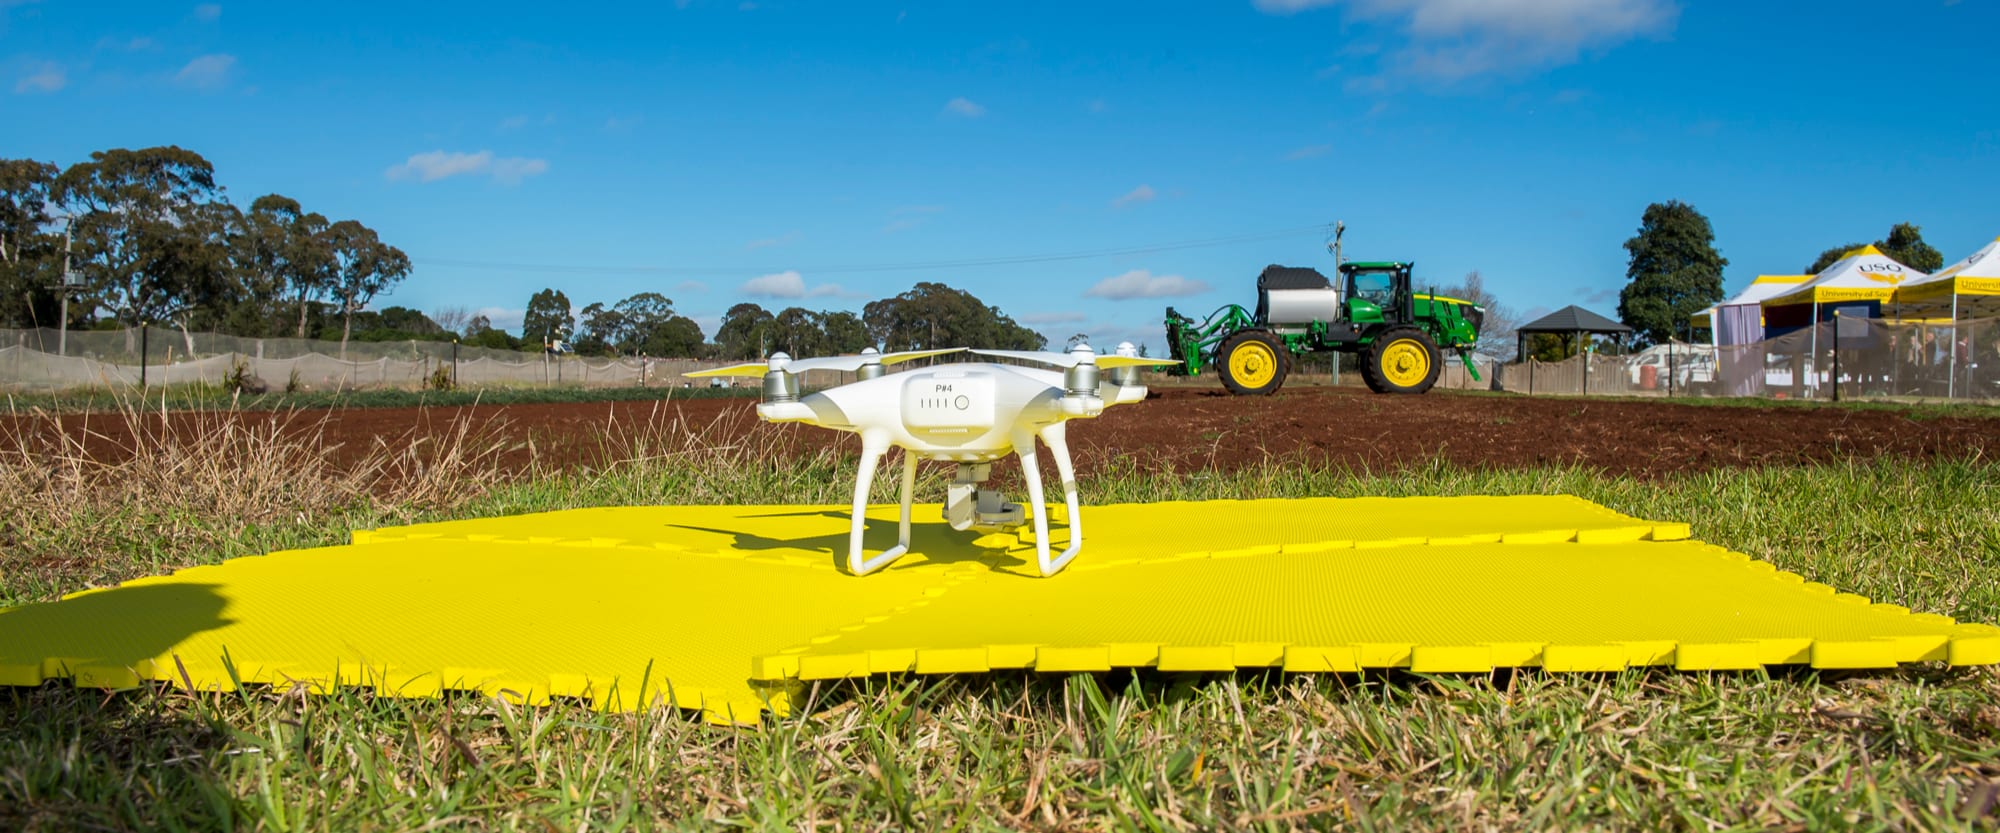 How Agricultural Engineering Is Changing The Way We Farm